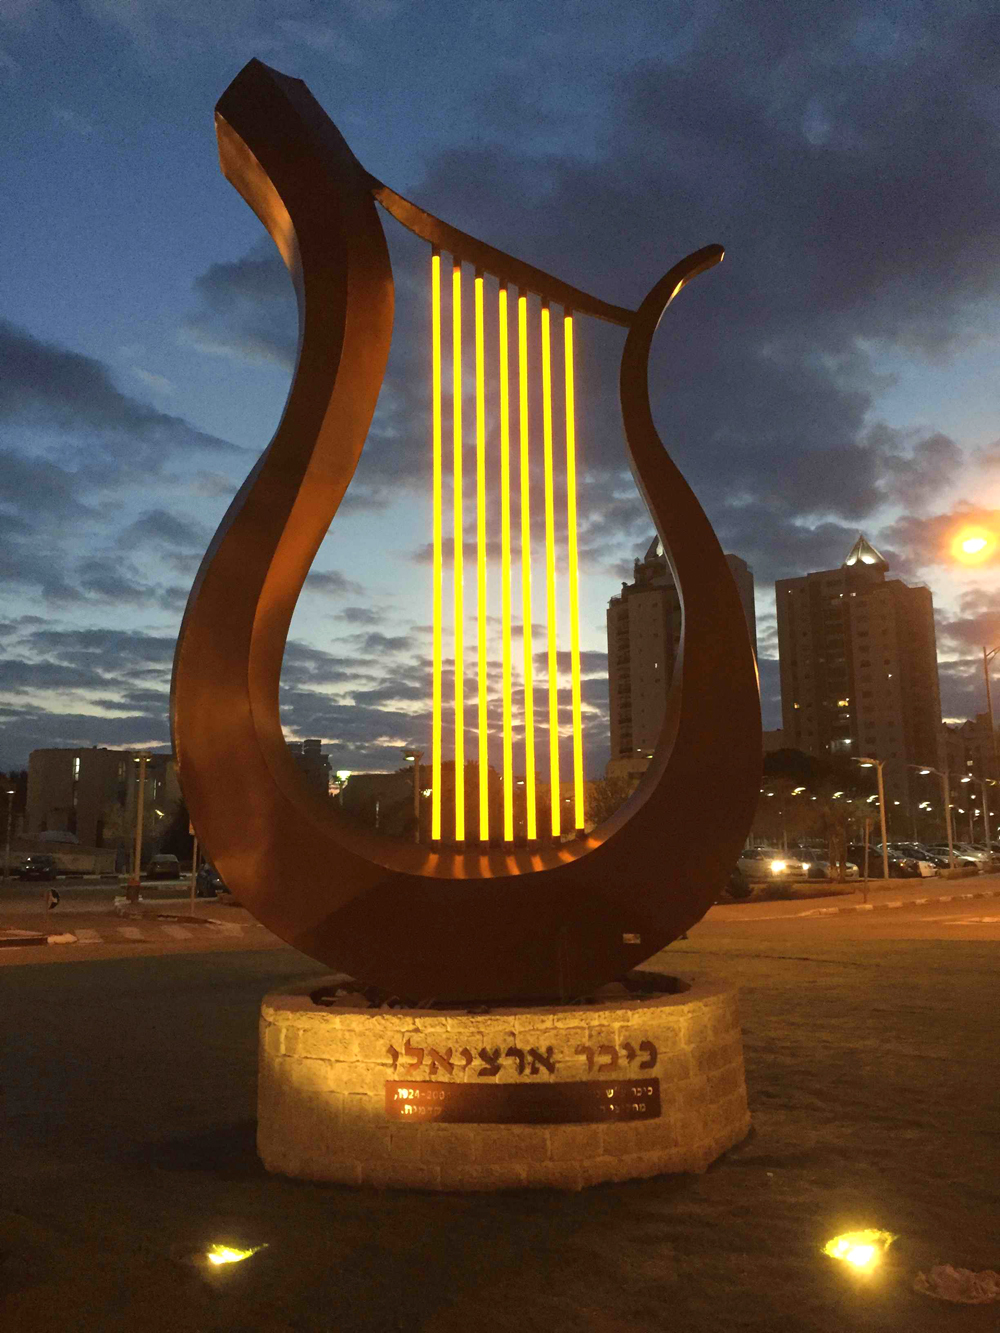 The statue of the harp is placed in the Mishkan for performing arts in Beer Sheva